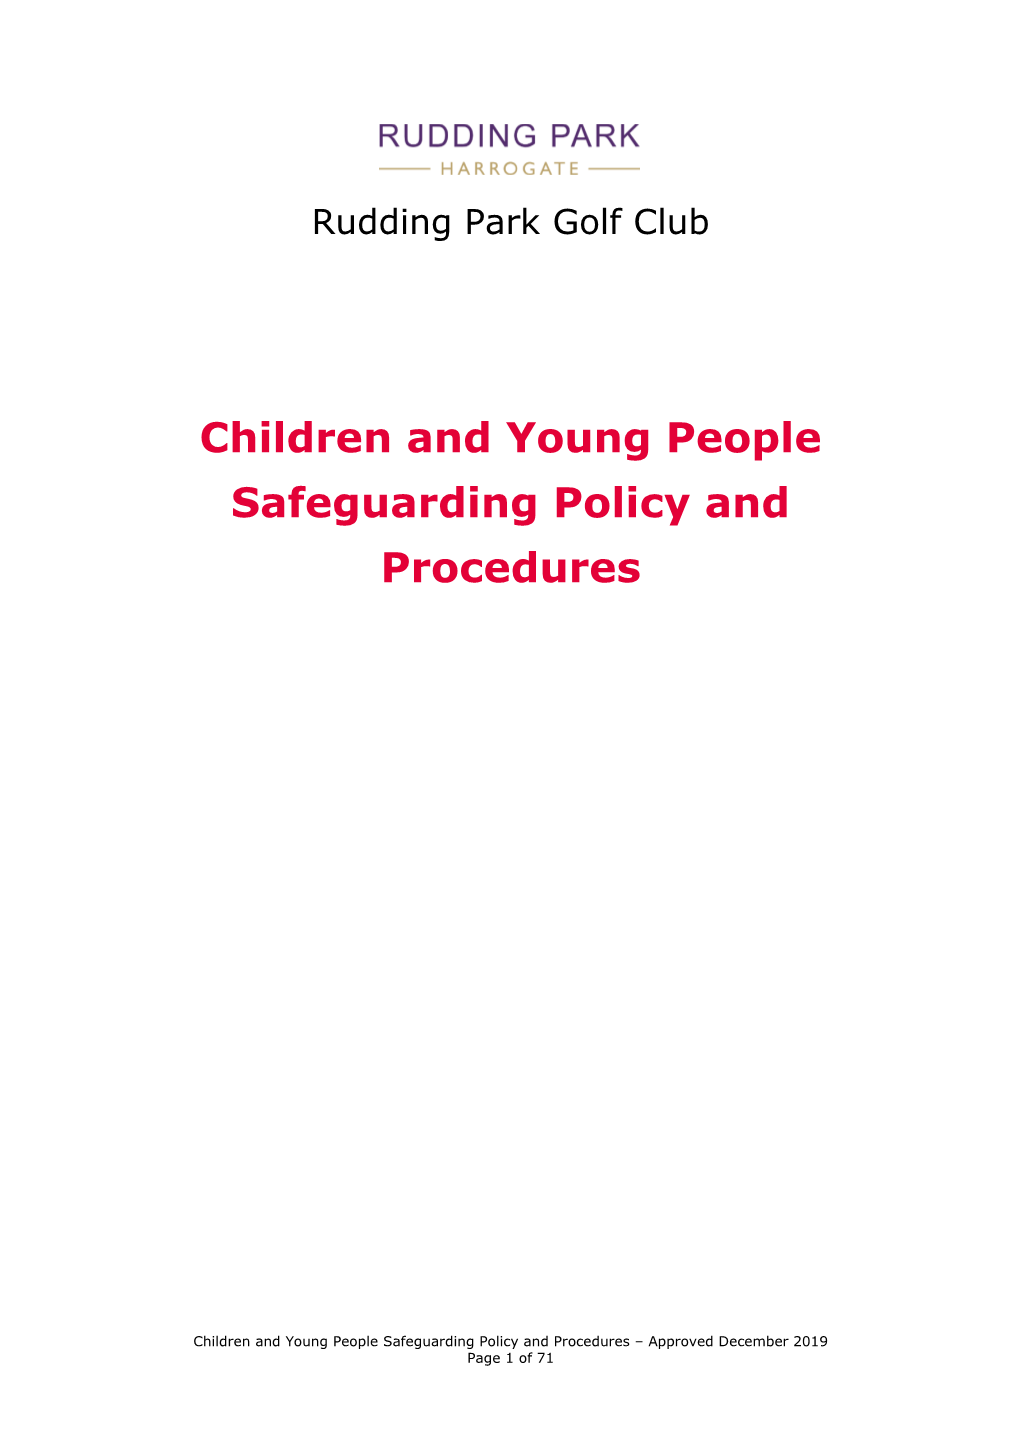 Children and Young People Safeguarding Policy and Procedures